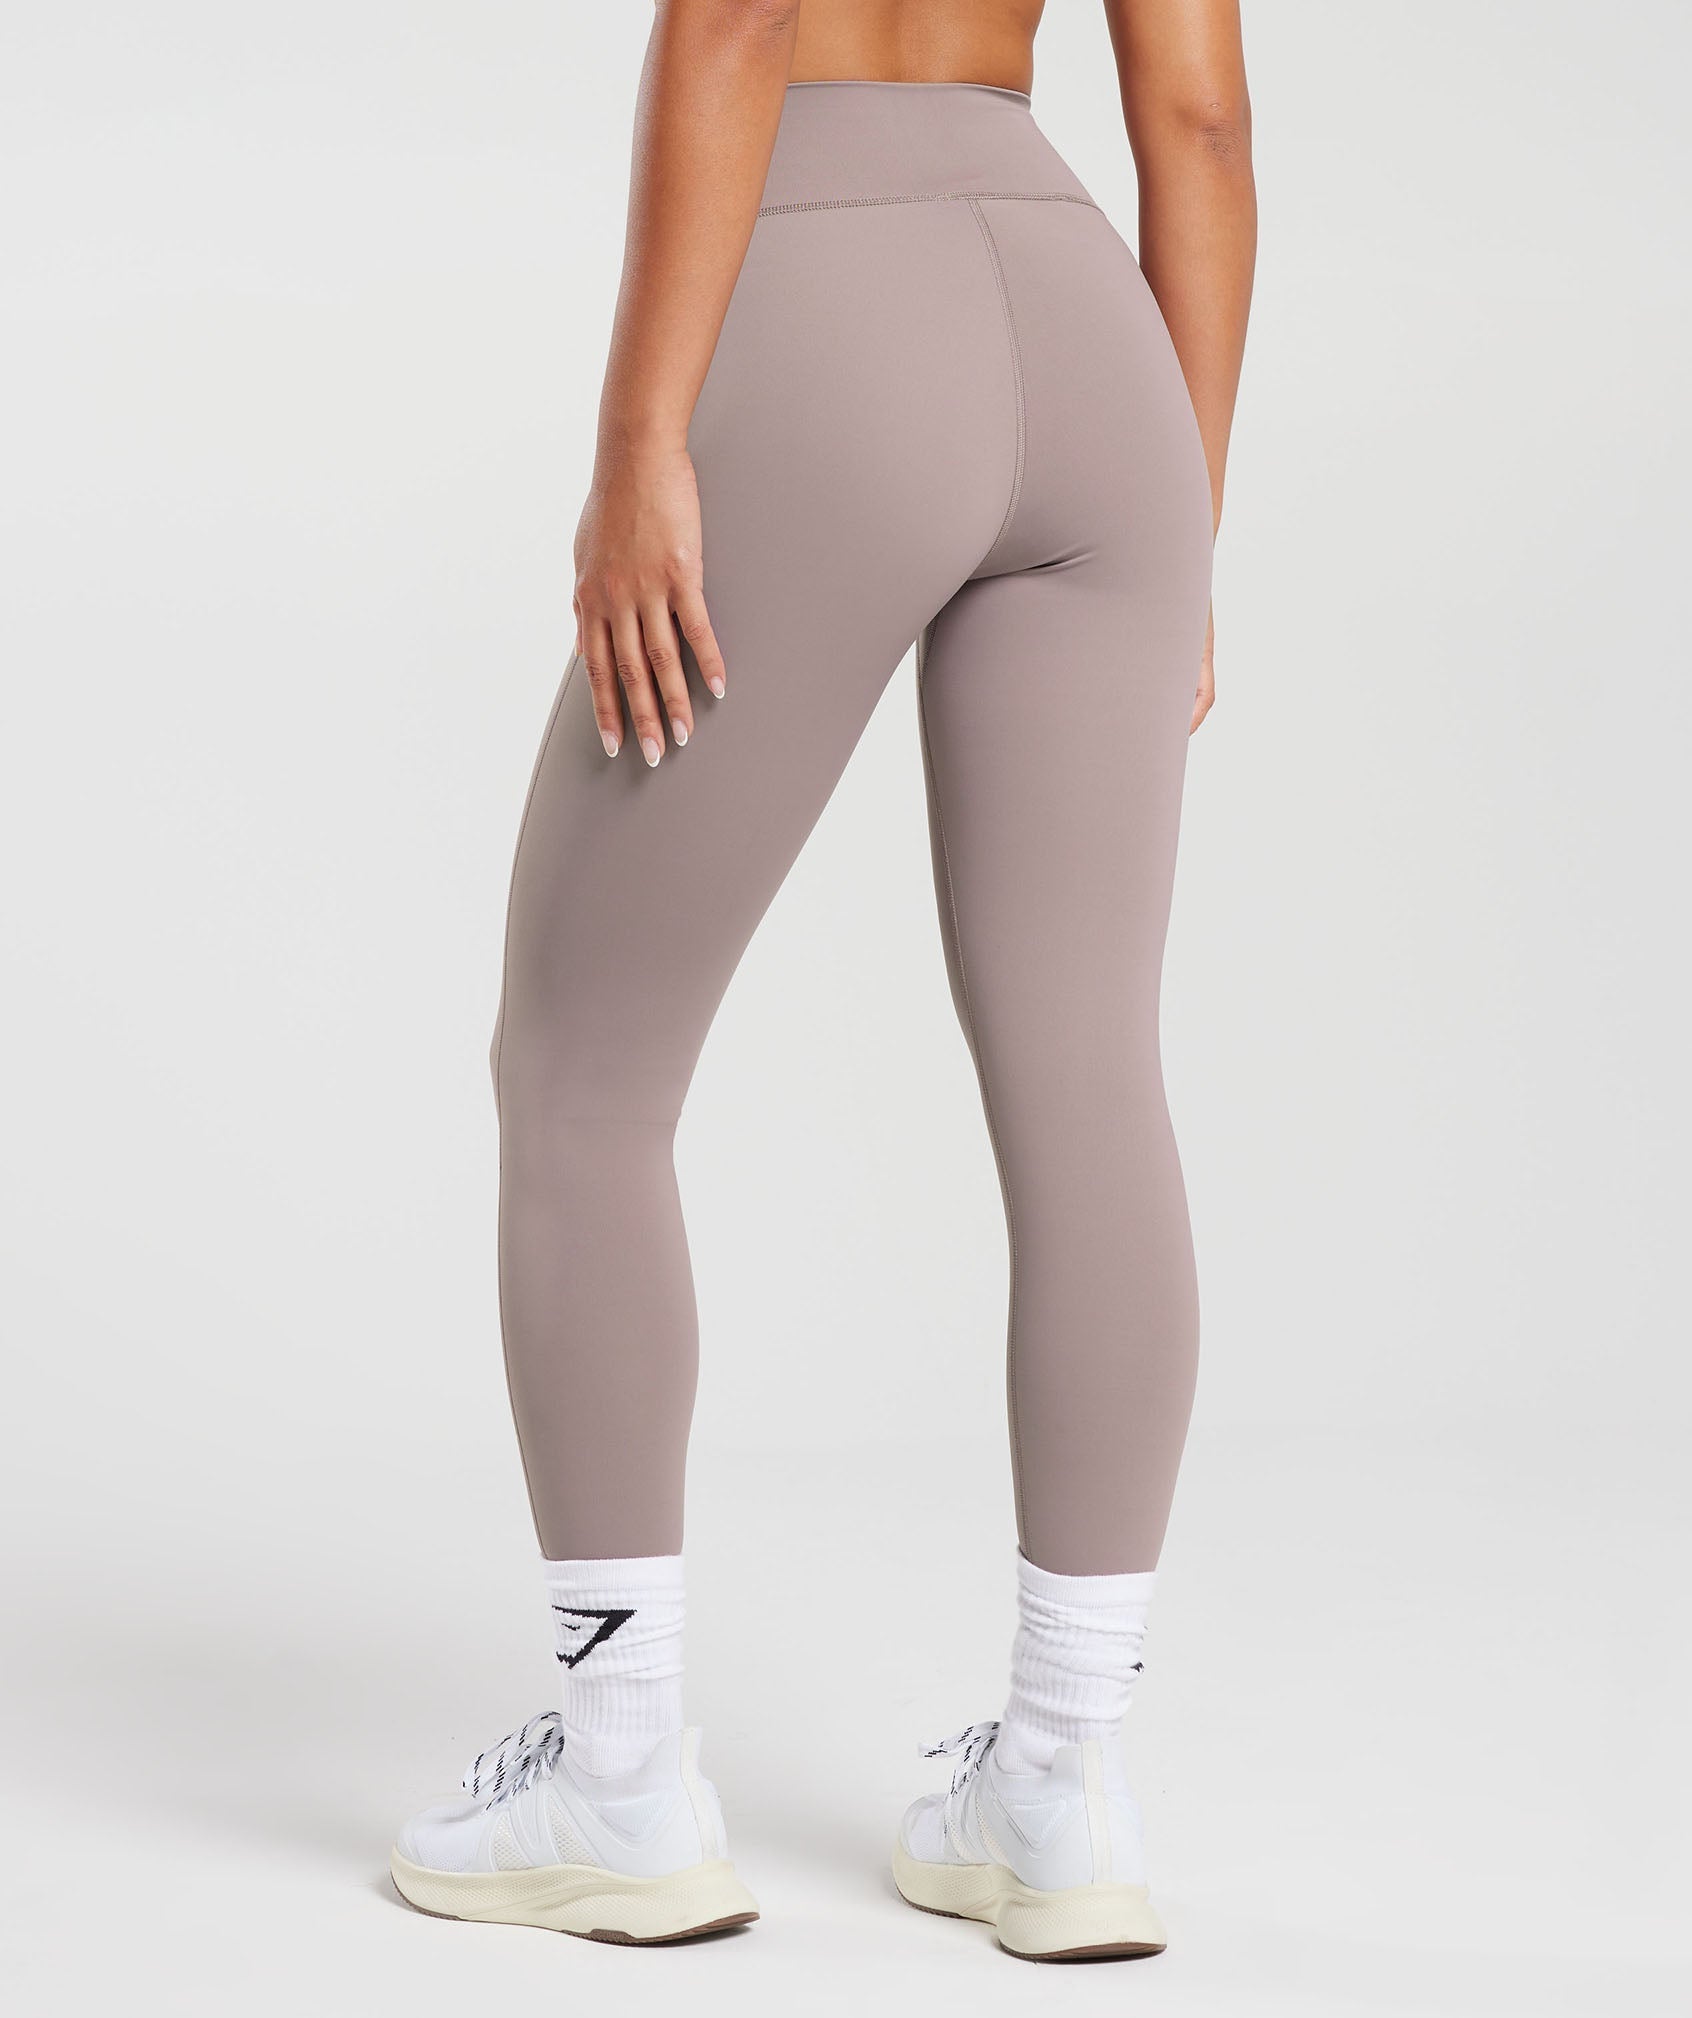 Elevate Leggings in Washed Mauve - view 2